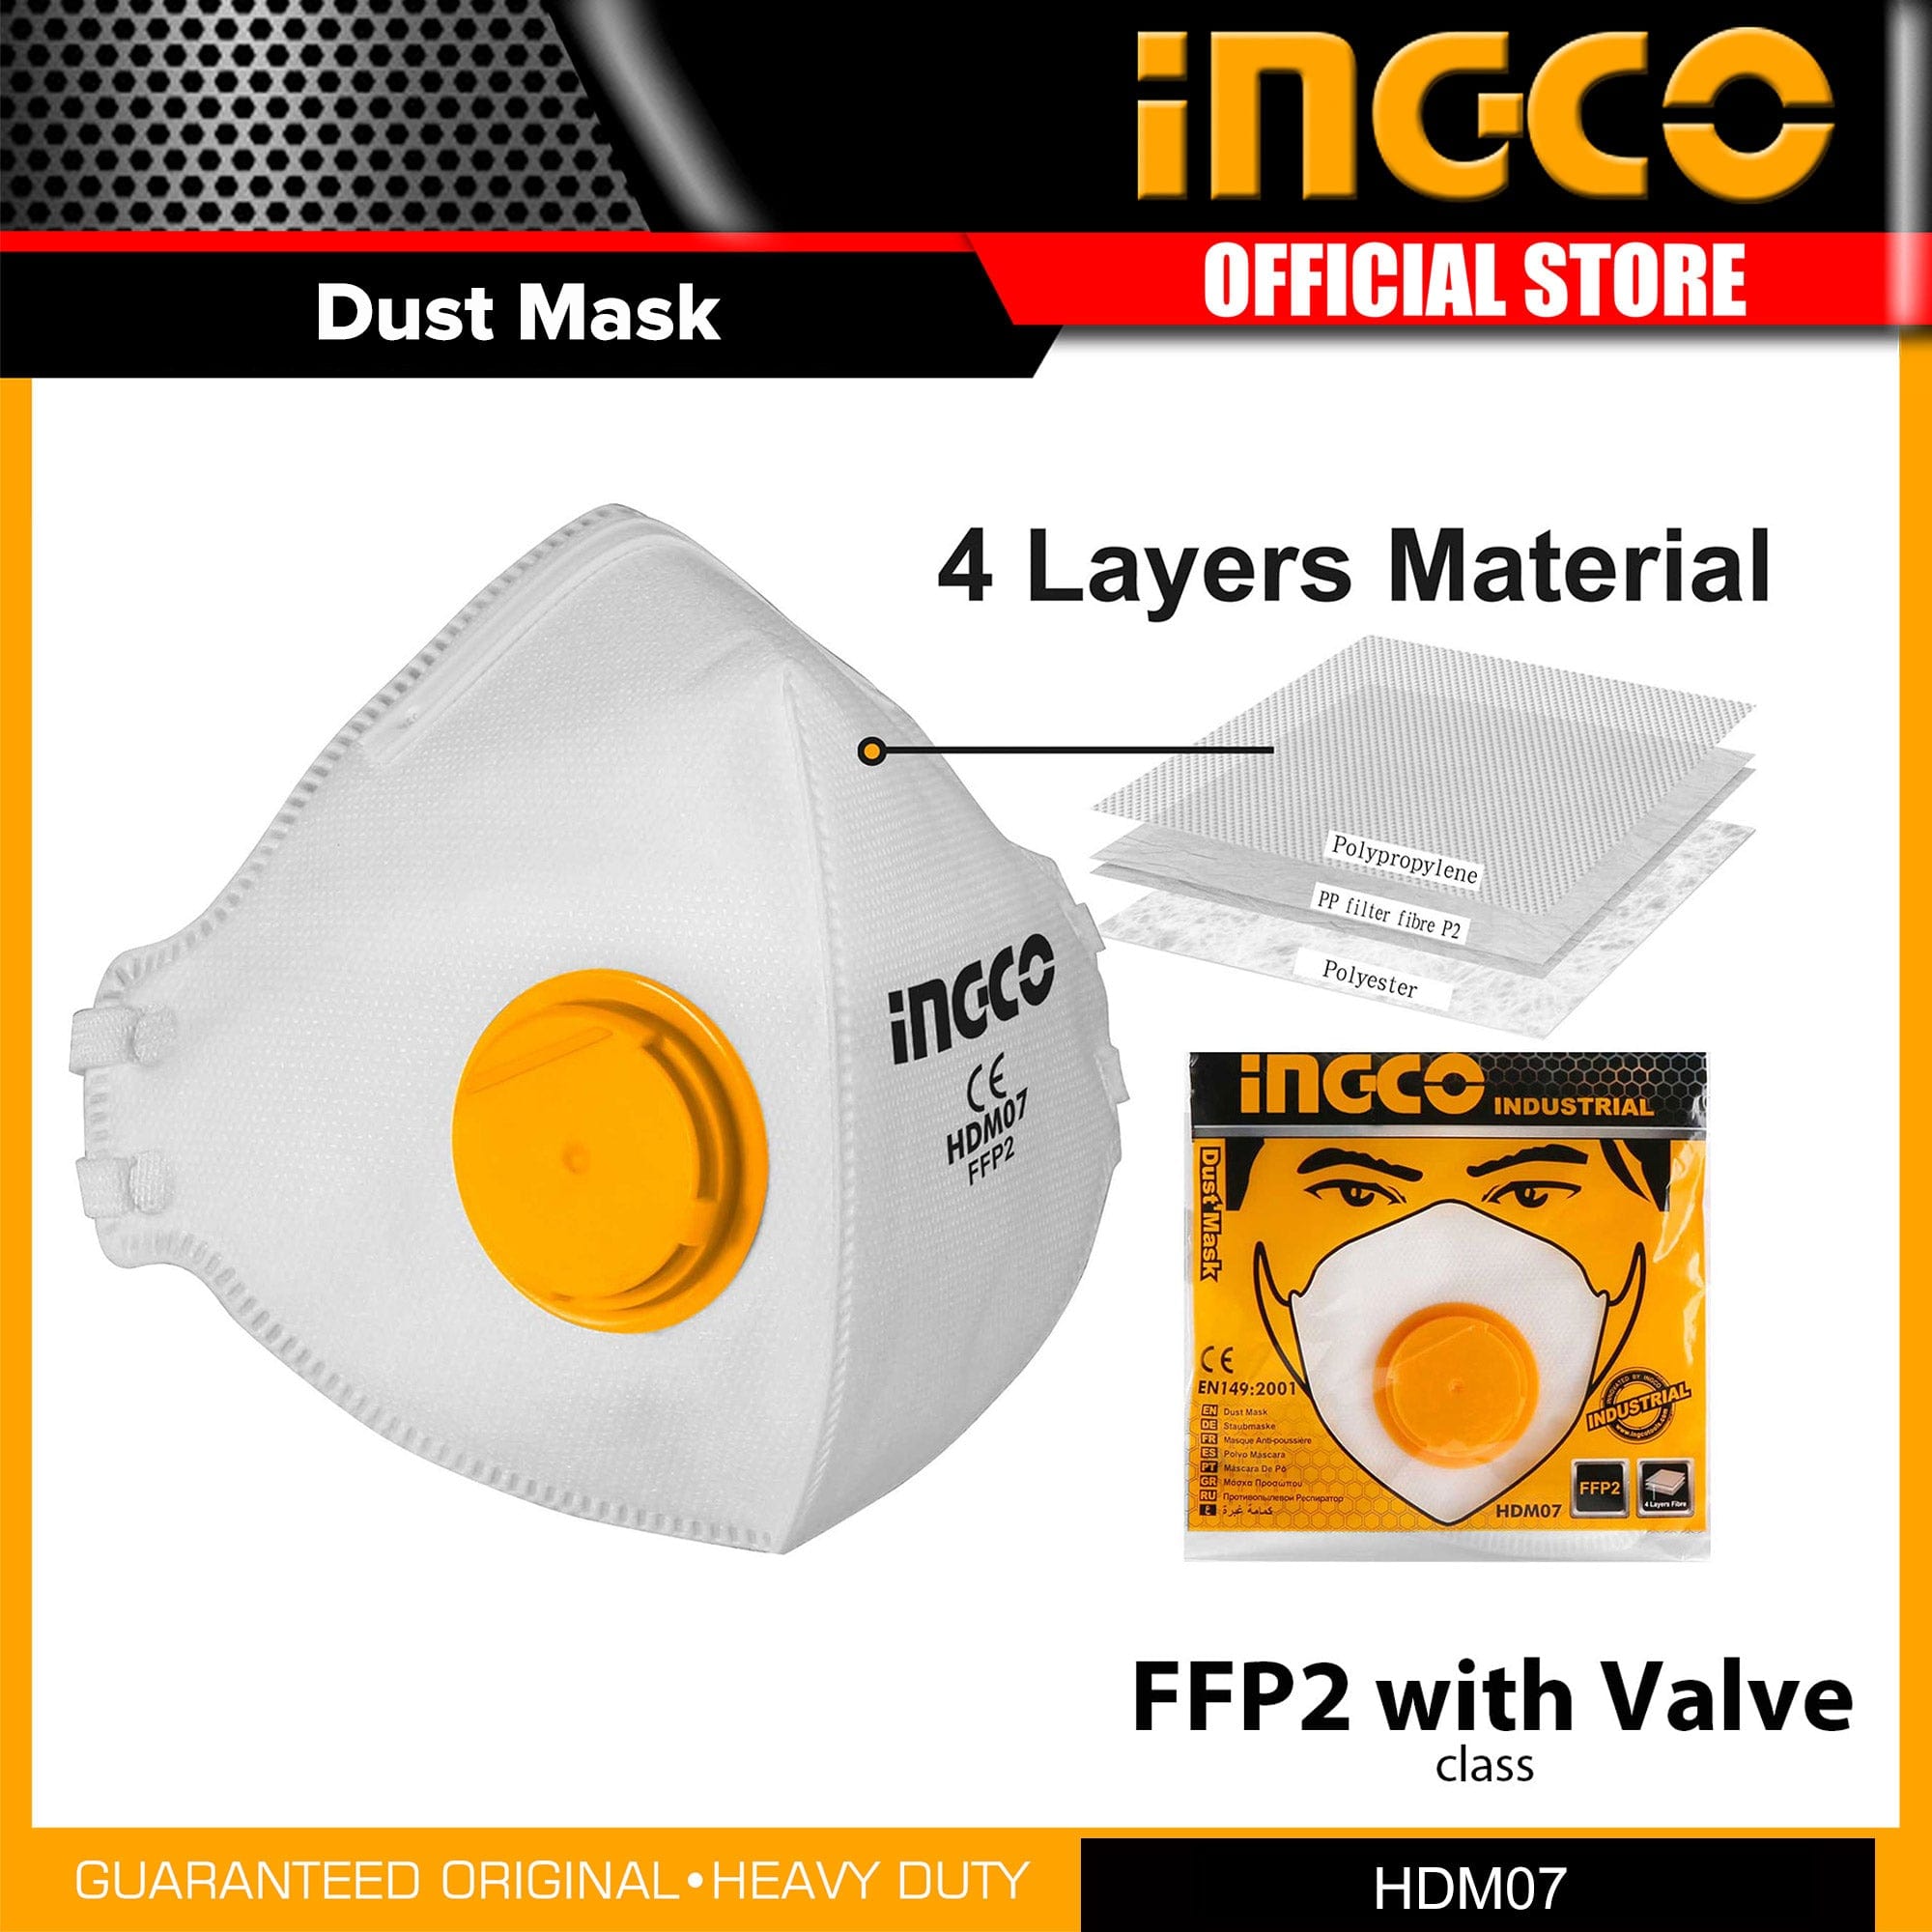 Ingco Dust Mask with Breath Valve - HDM07 - Buy Online in Accra, Ghana at Supply Master Dust Masks & Respirators Buy Tools hardware Building materials